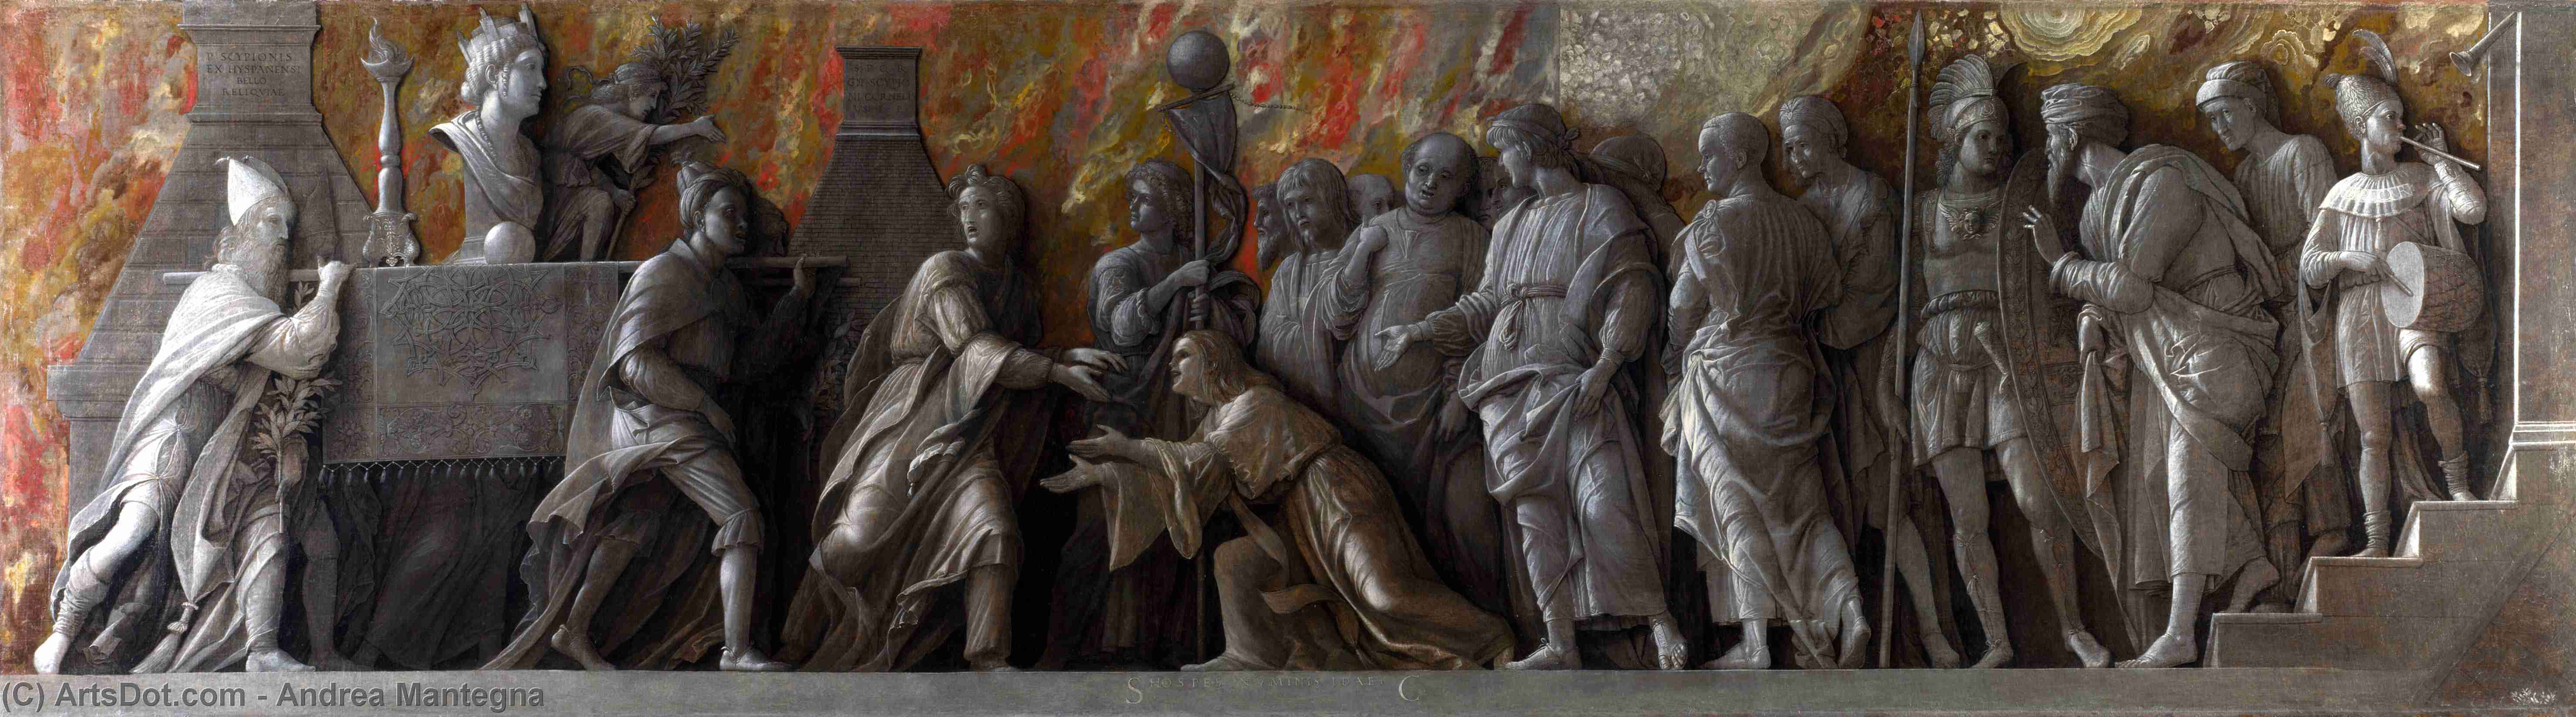 Wikioo.org - สารานุกรมวิจิตรศิลป์ - จิตรกรรม Andrea Mantegna - The Introduction of the Cult of Cybele at Rome